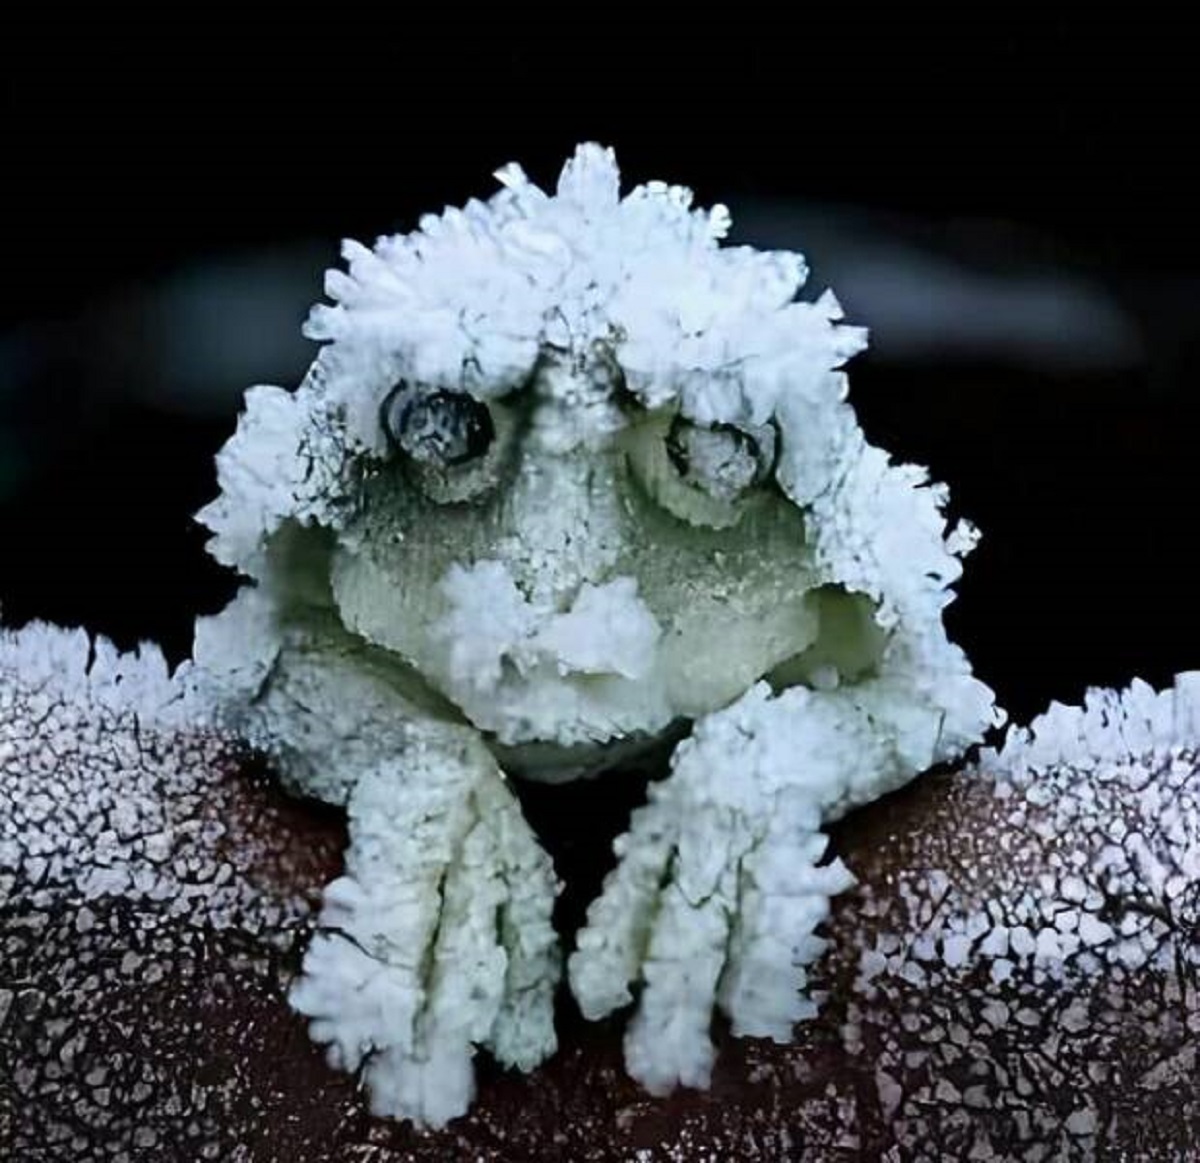 "The Alaskan Wood Frog, Freezes During The Winter And While Frozen, The Frog Stops Breathing And Heart Stops Beating And When It Thaws During Spring, He Wakes Up And Hop Away"